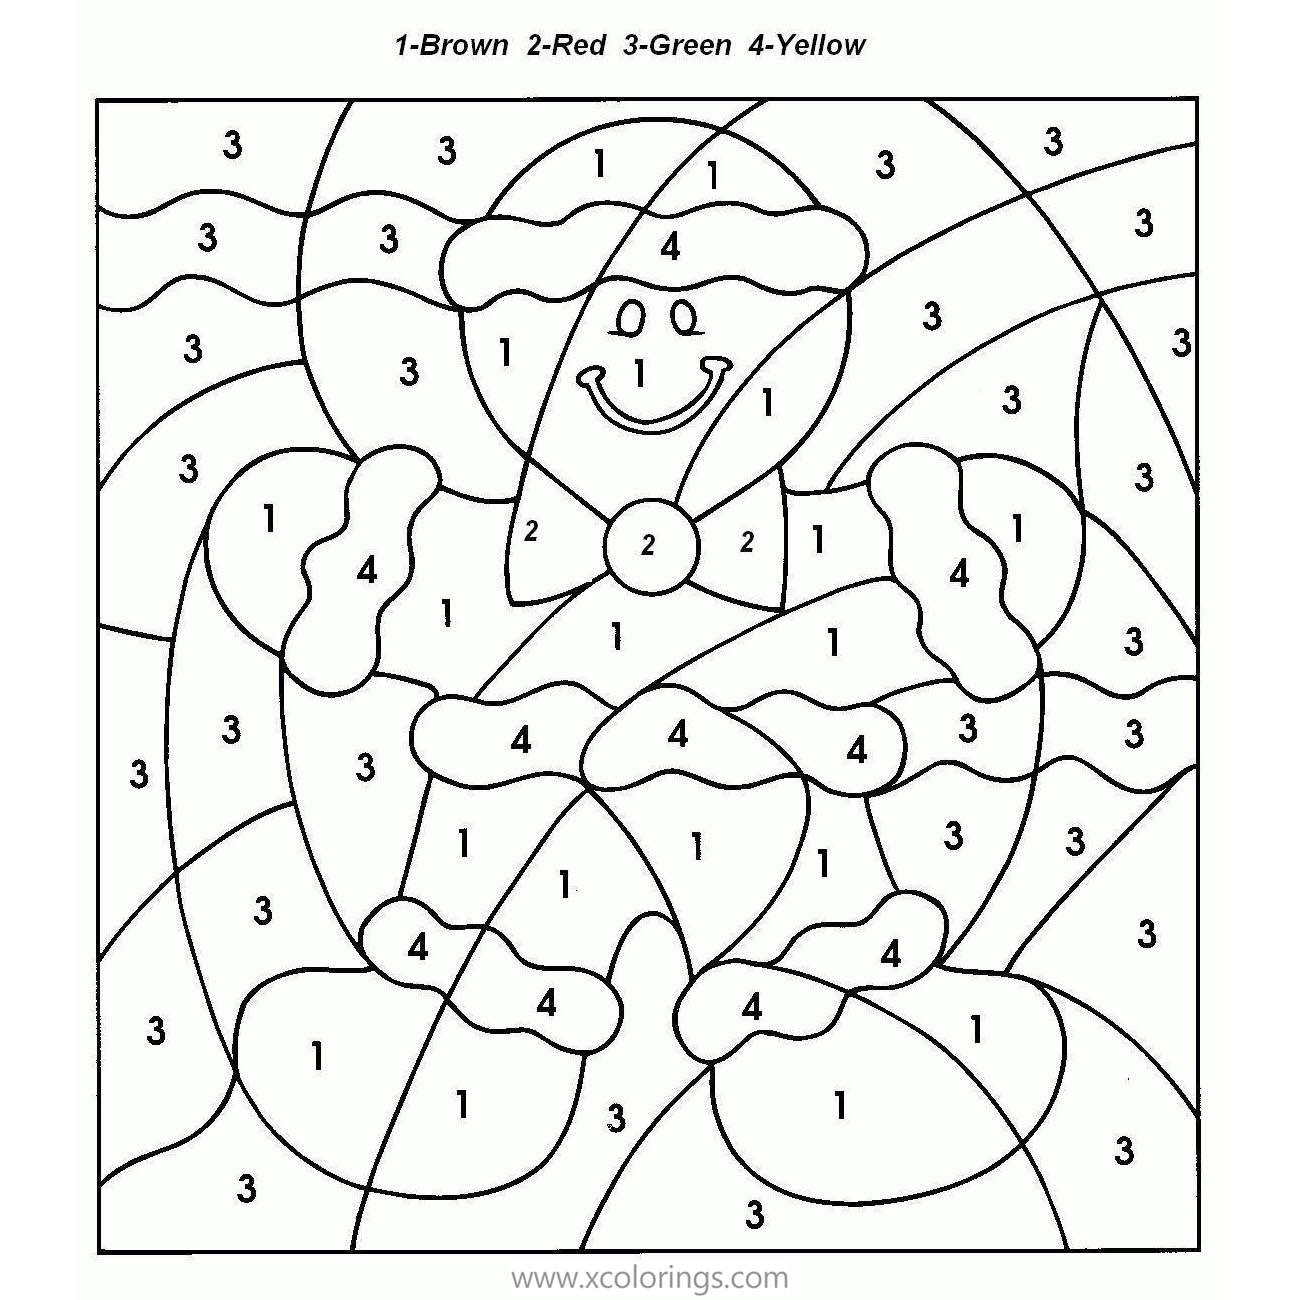 Gingerbread Man Coloring Pages Connect the Dots - XColorings.com